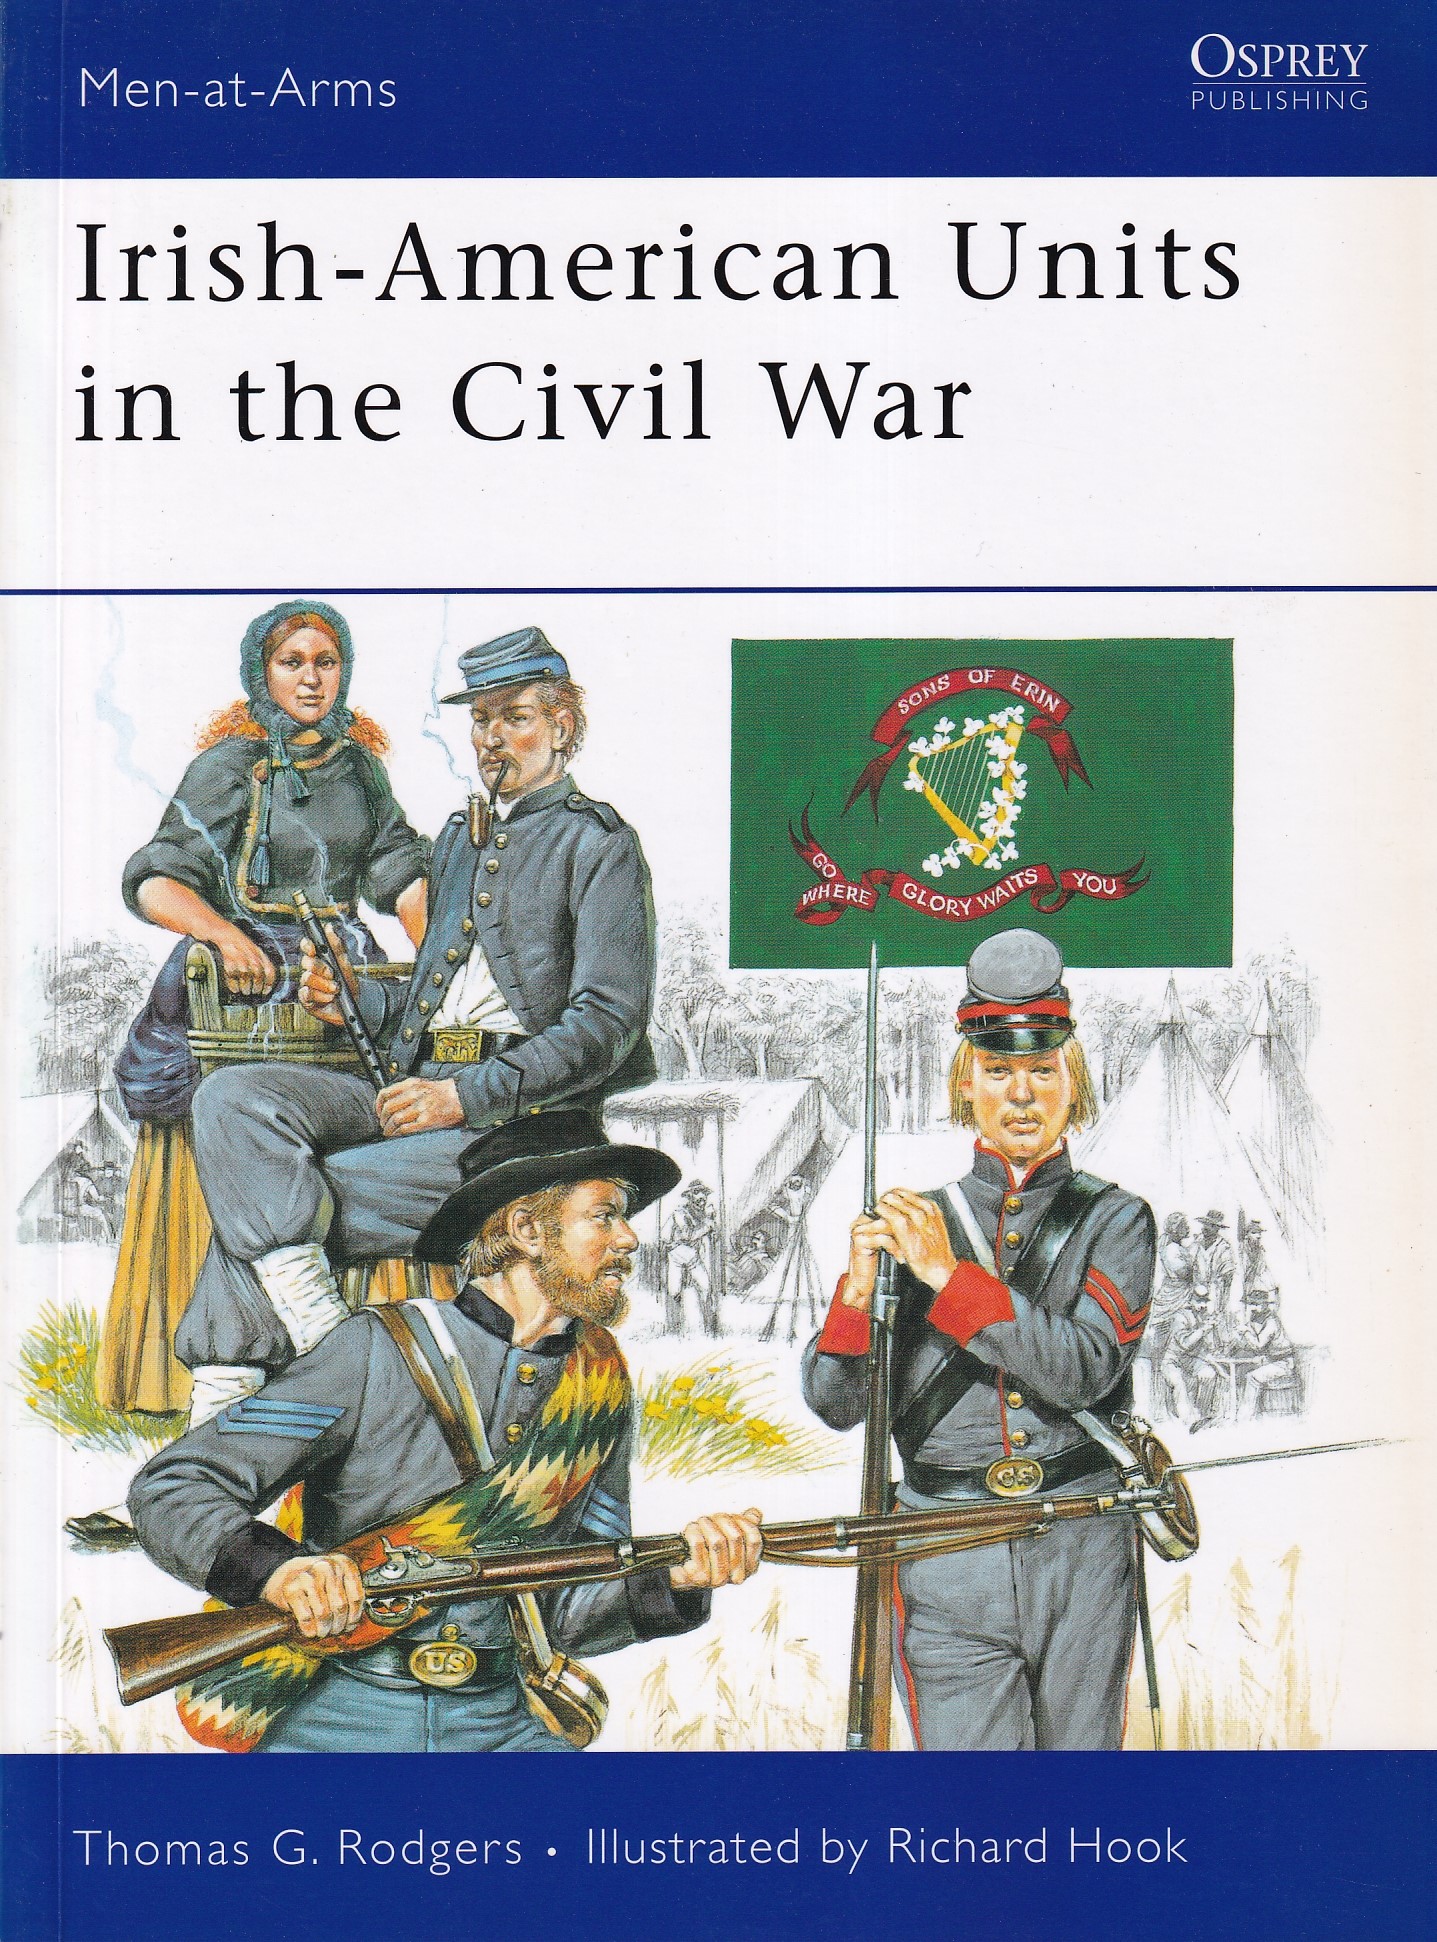 Irish-American Units in the Civil War | Thomas G. Rodgers | Charlie Byrne's